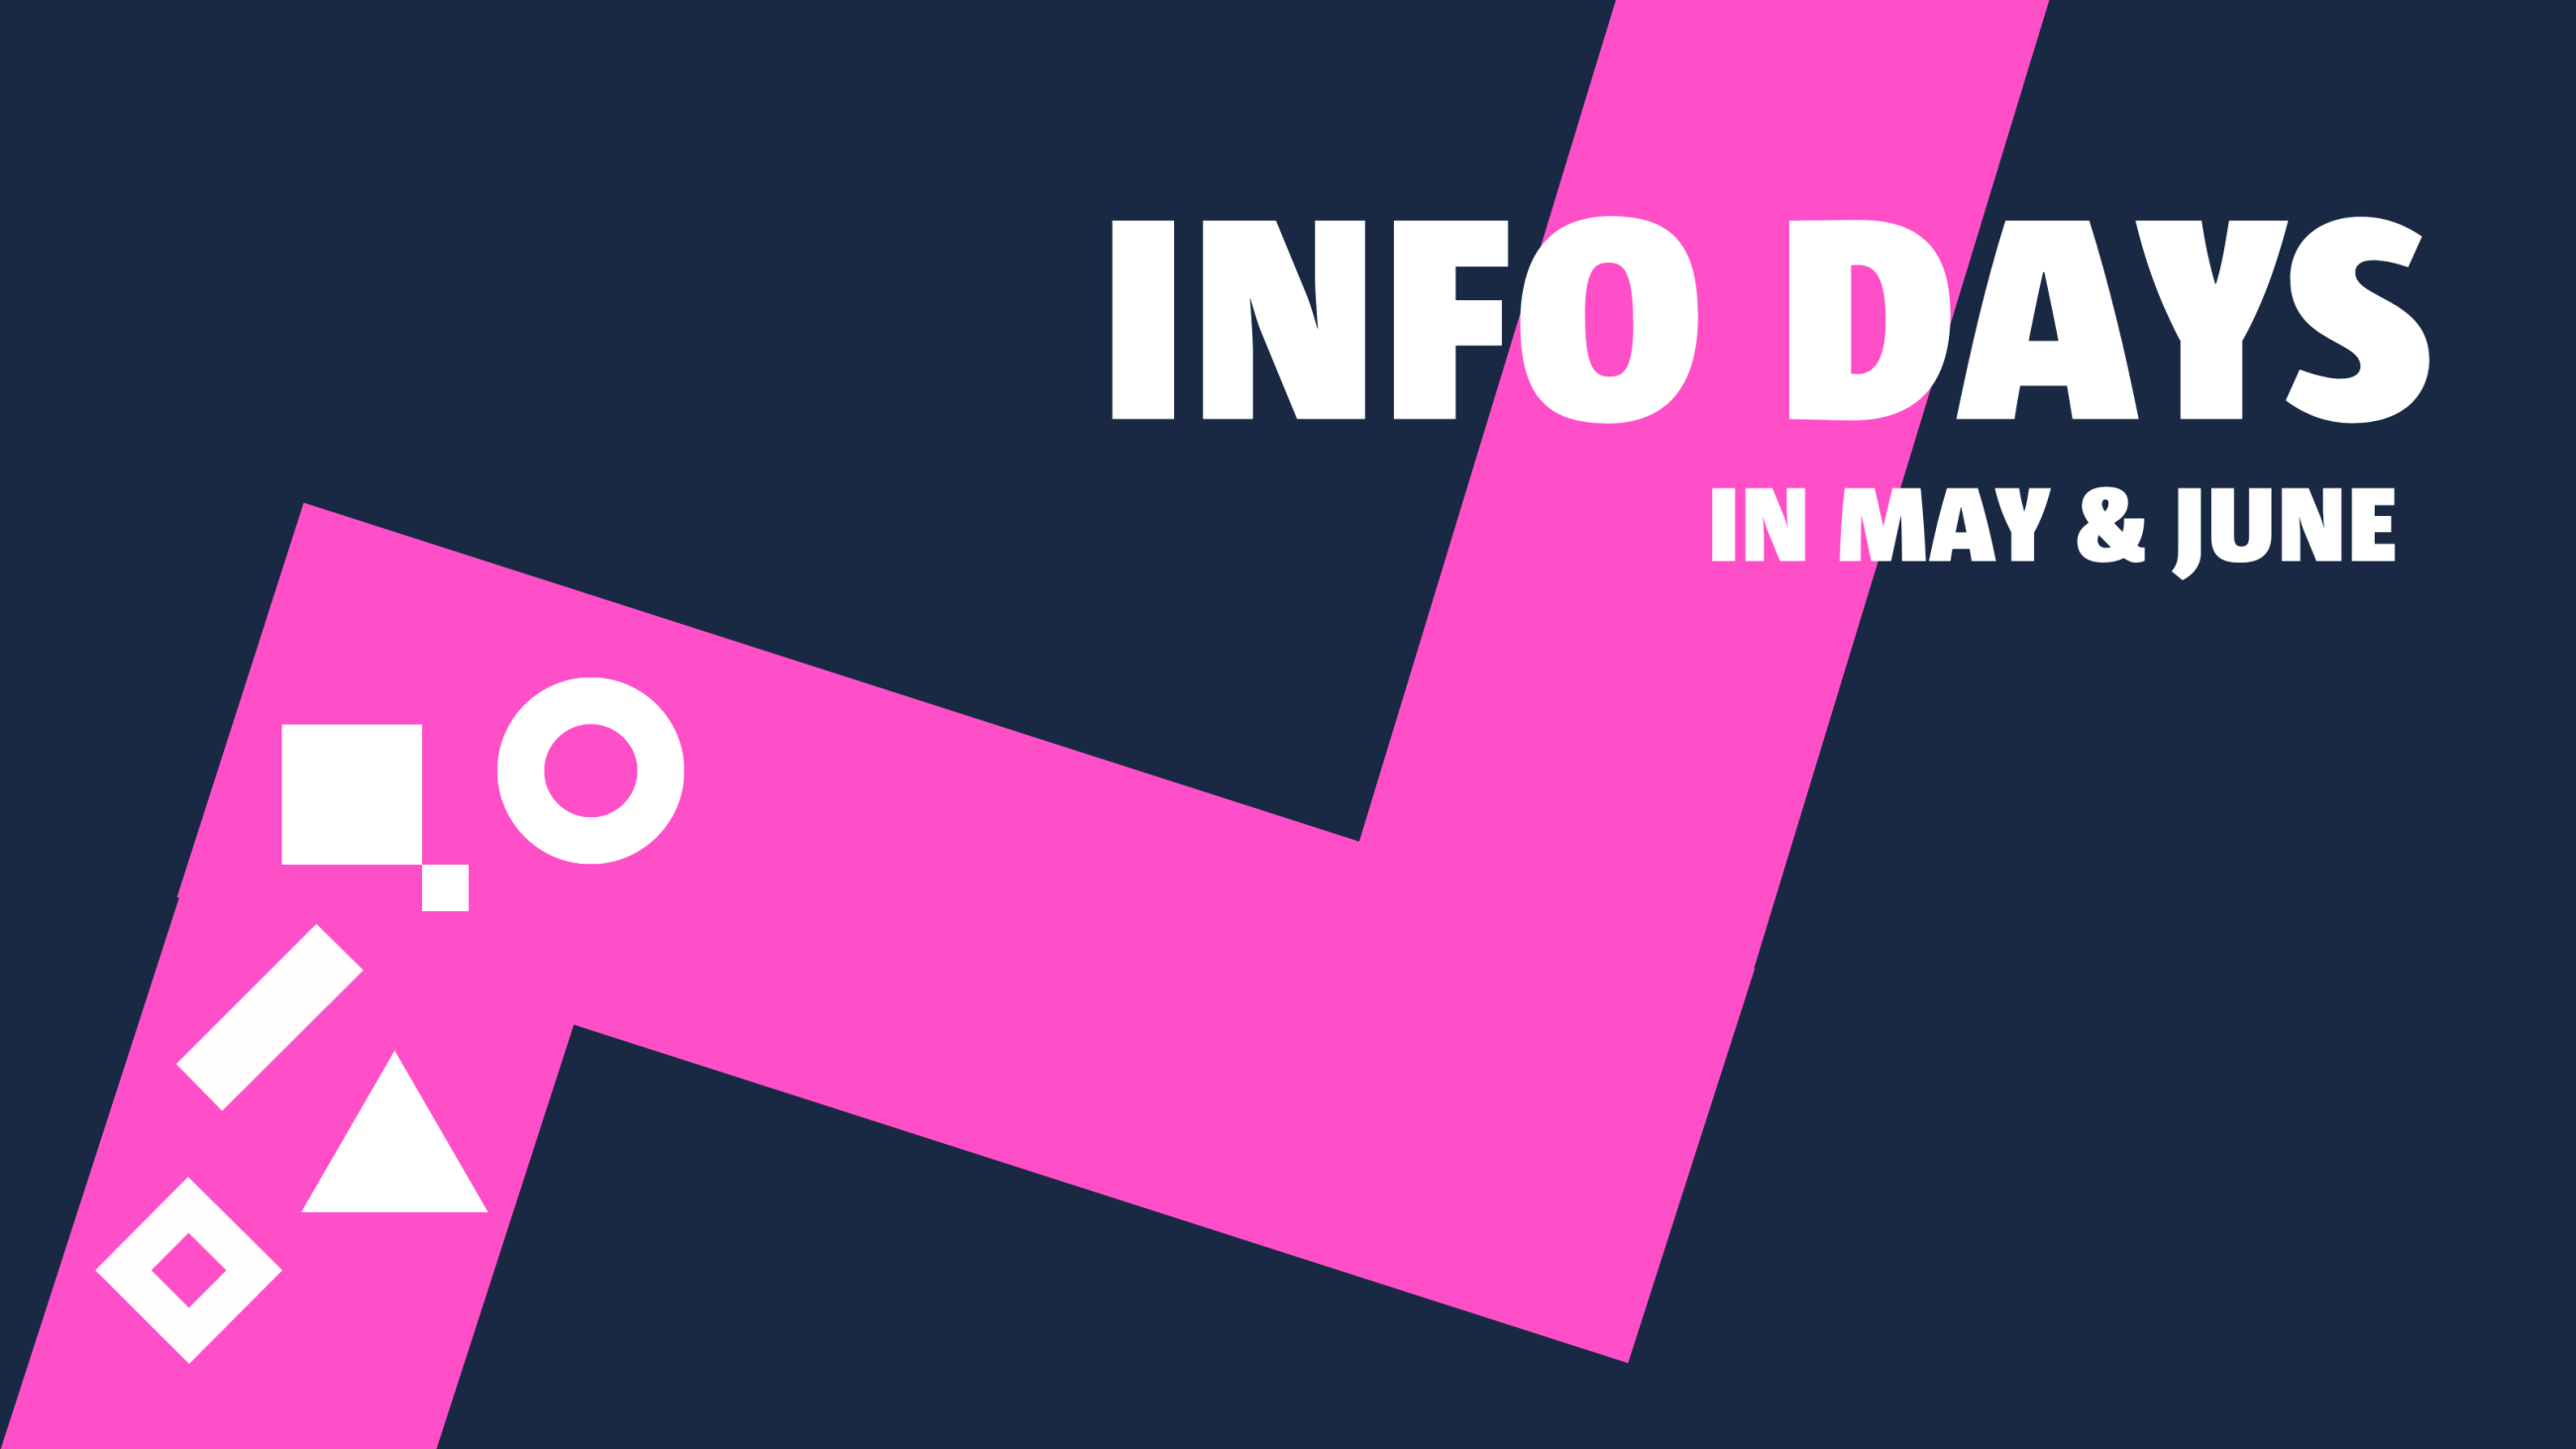 Key visual info days with department symbols and text "Info days in May and June" in front of abstract path